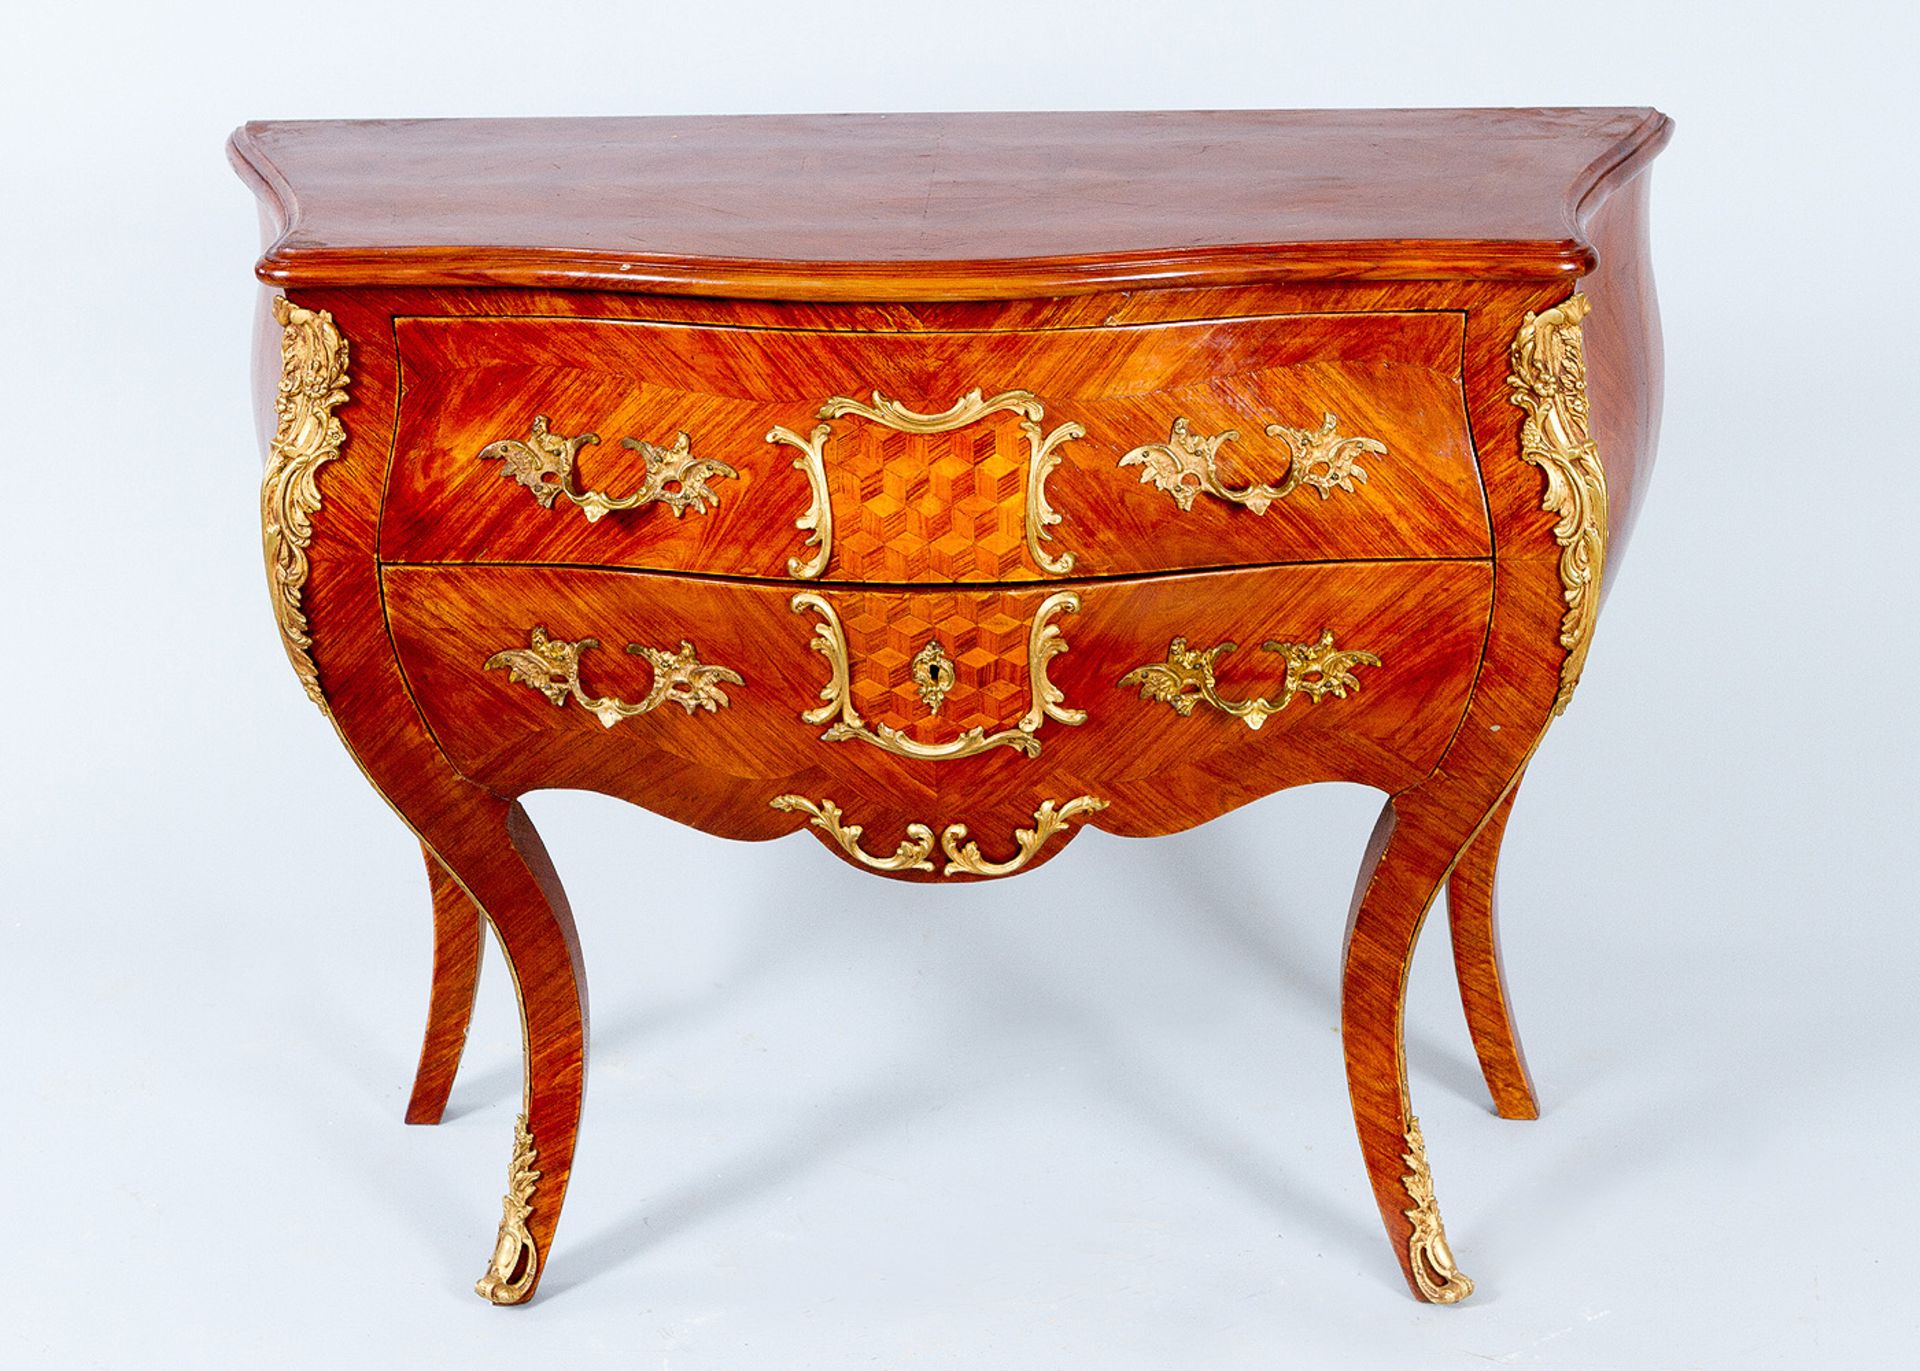 Pair of French commodes - Image 2 of 3